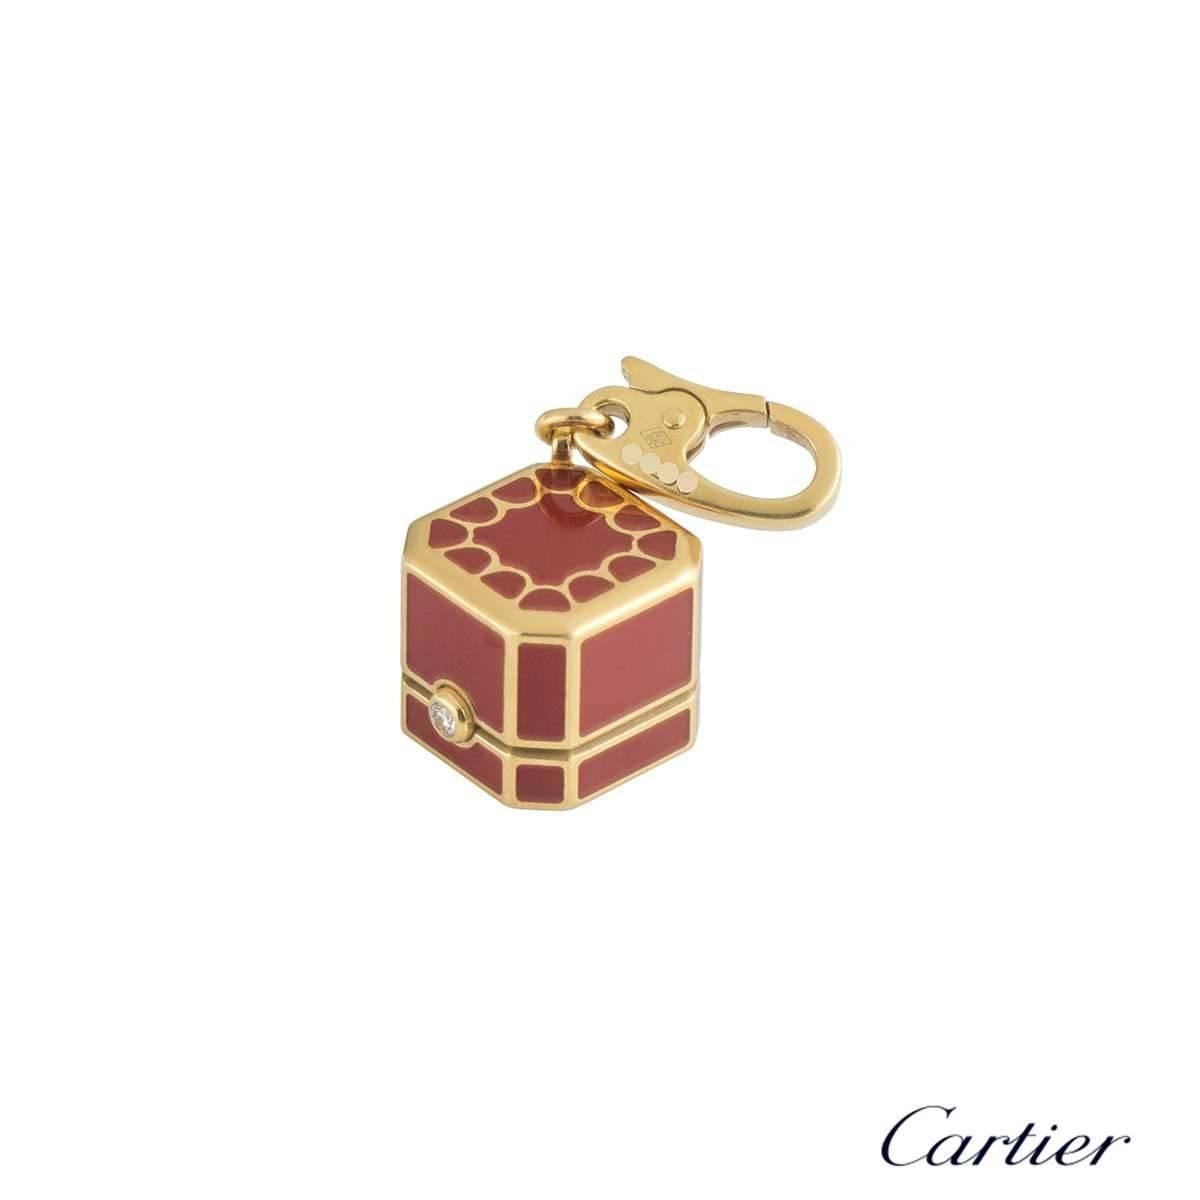 cartier red box charm